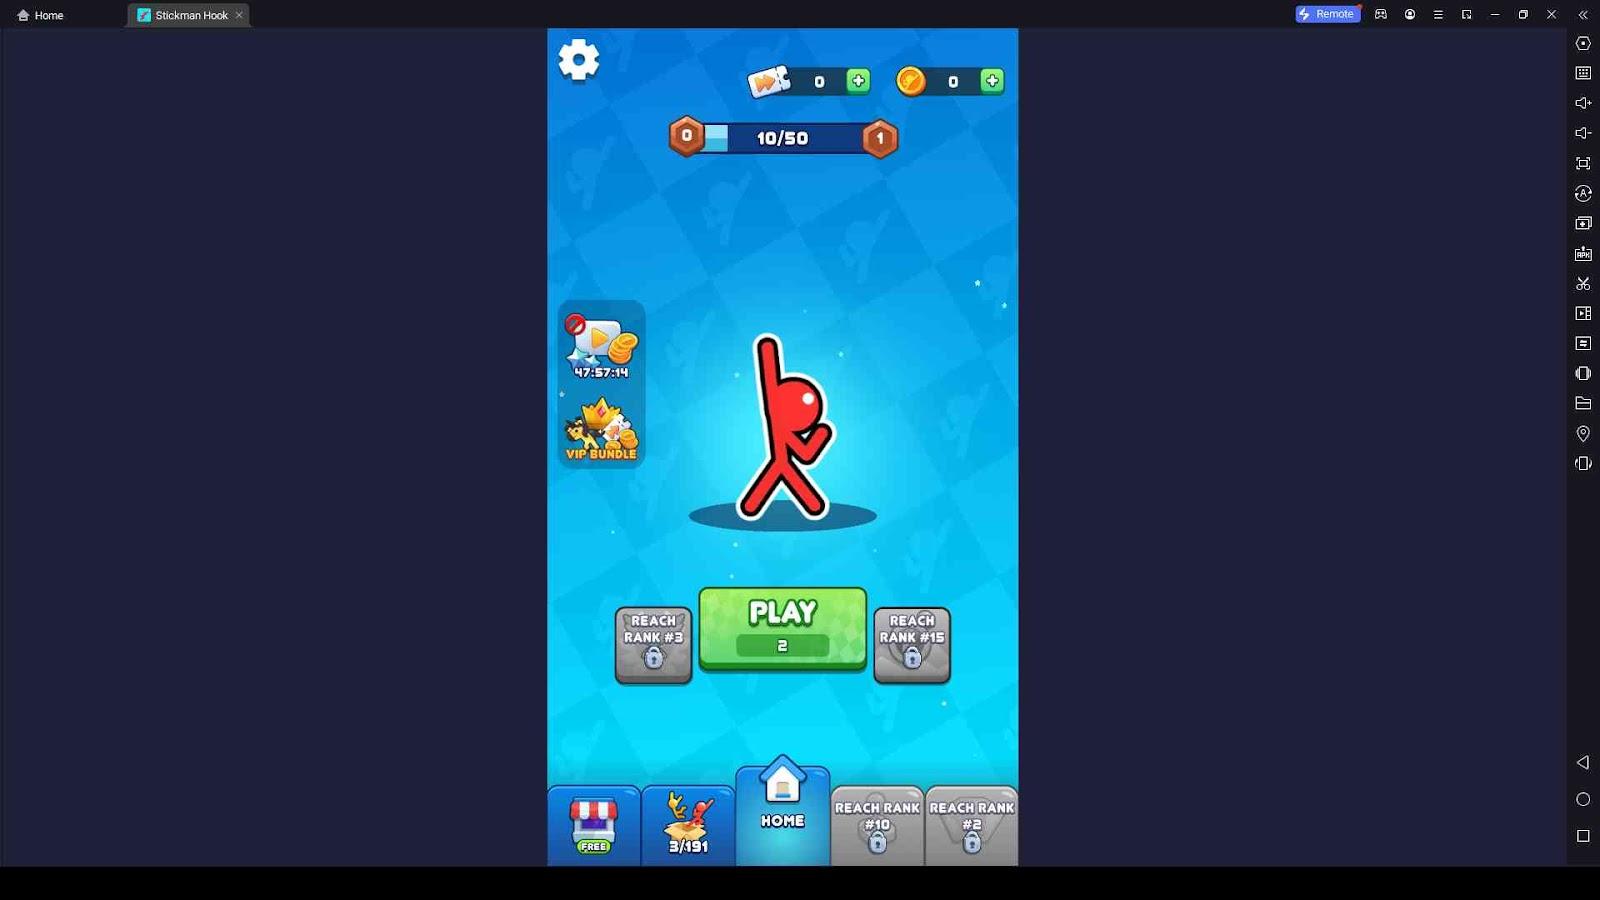 Stickman Hook has the 'buy' button for their VIP purchase in the same place  as the play button, which appears after every 5 or so levels. :  r/assholedesign